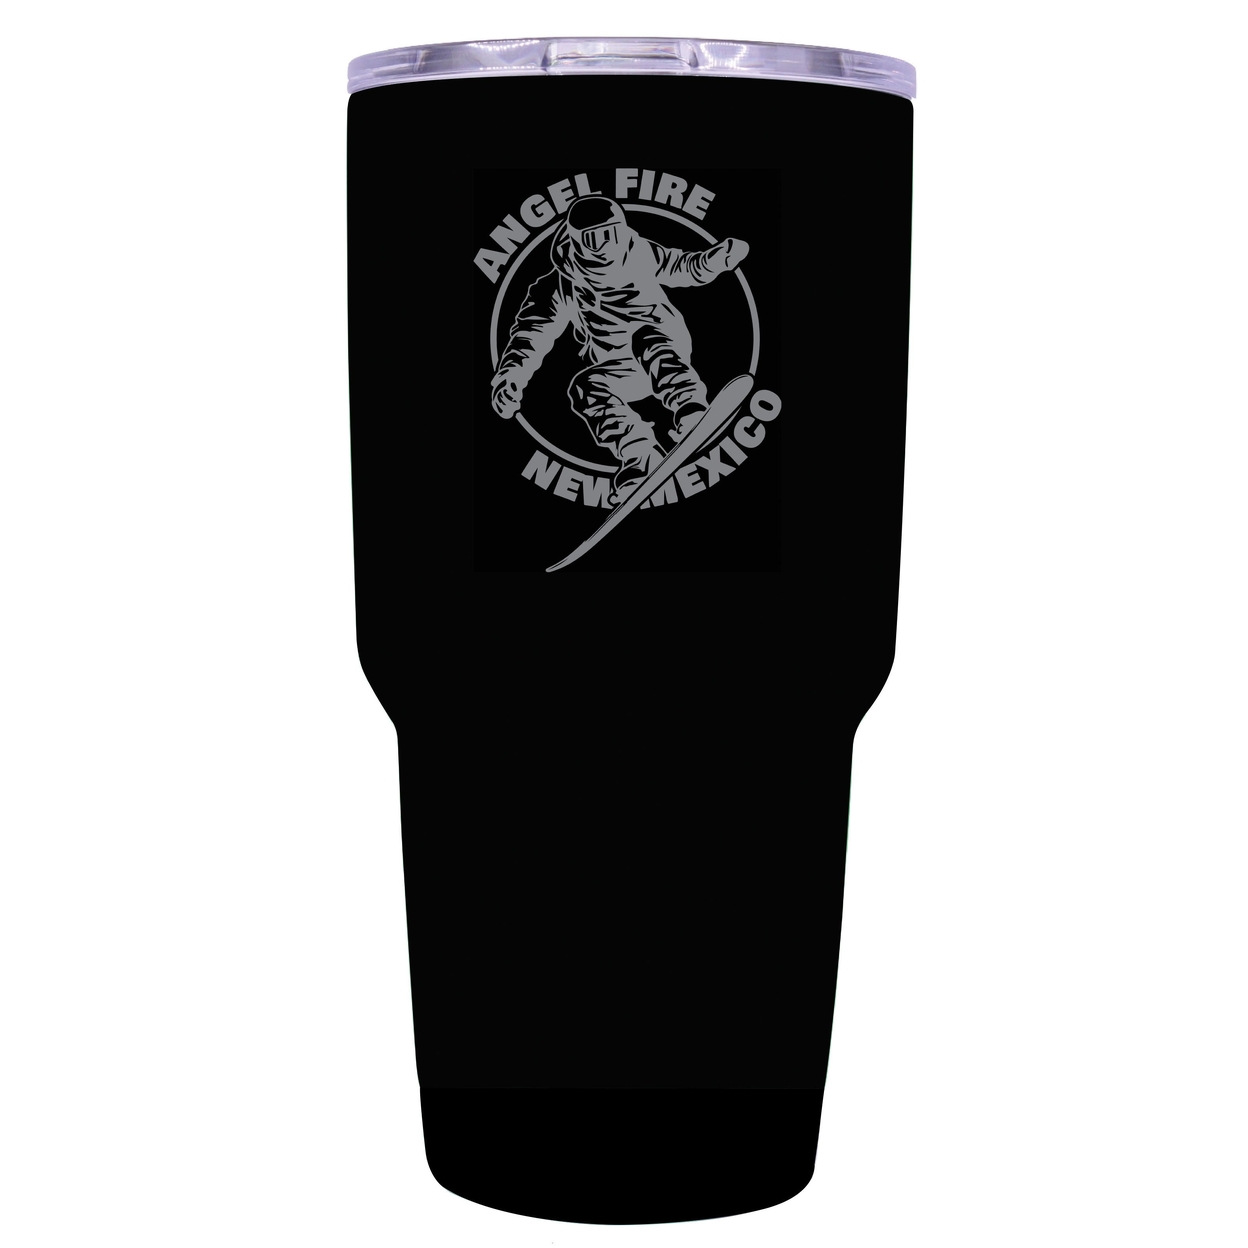 Angel Fire New Mexico Souvenir 24 Oz Engraved Insulated Stainless Steel Tumbler - Black,,4-Pack